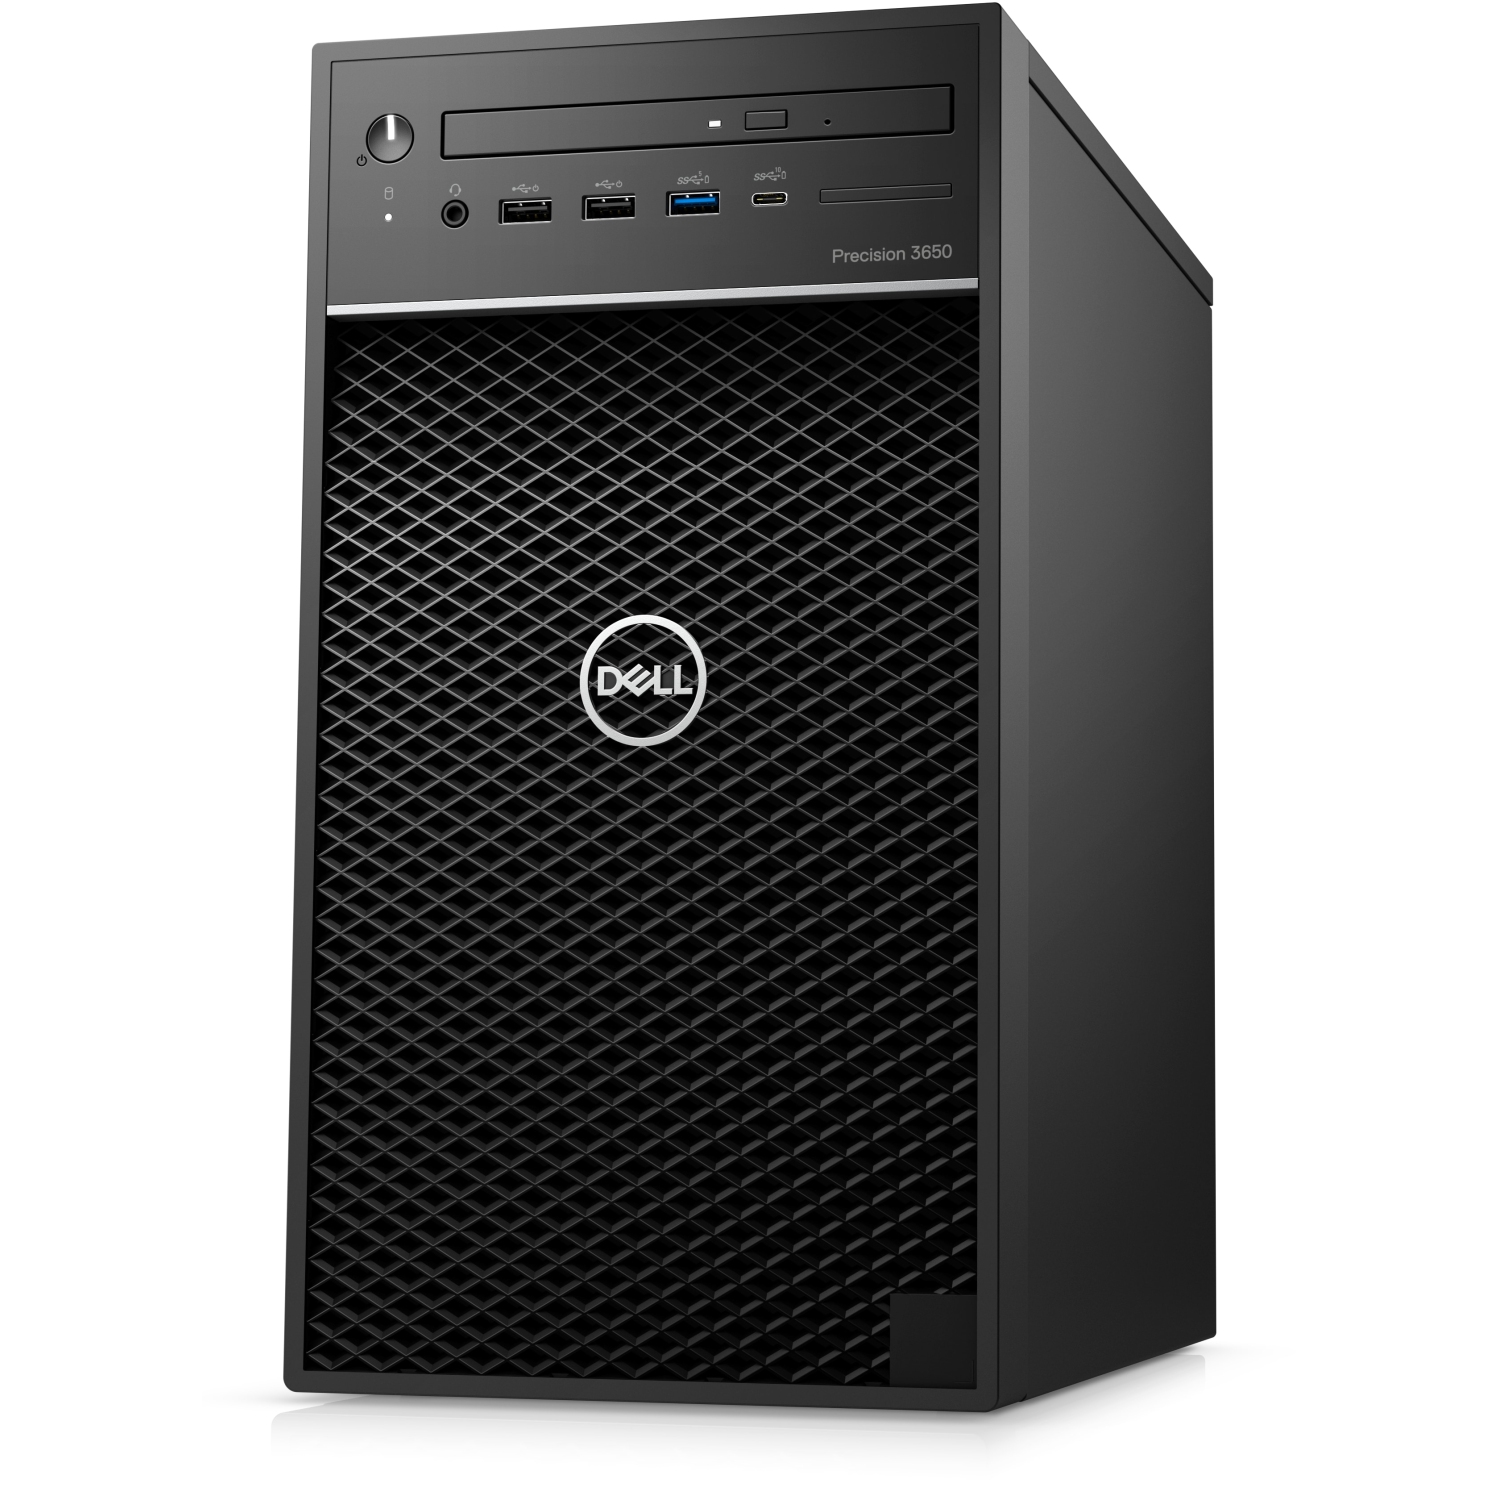 Refurbished (Excellent) - Dell Precision T3650 Workstation Desktop (2021), Core i9, 2TB SSD + 2TB SSD, 64GB RAM, RTX 3060, 8 Cores @ 5.3 GHz, 11th Gen CPU Certified